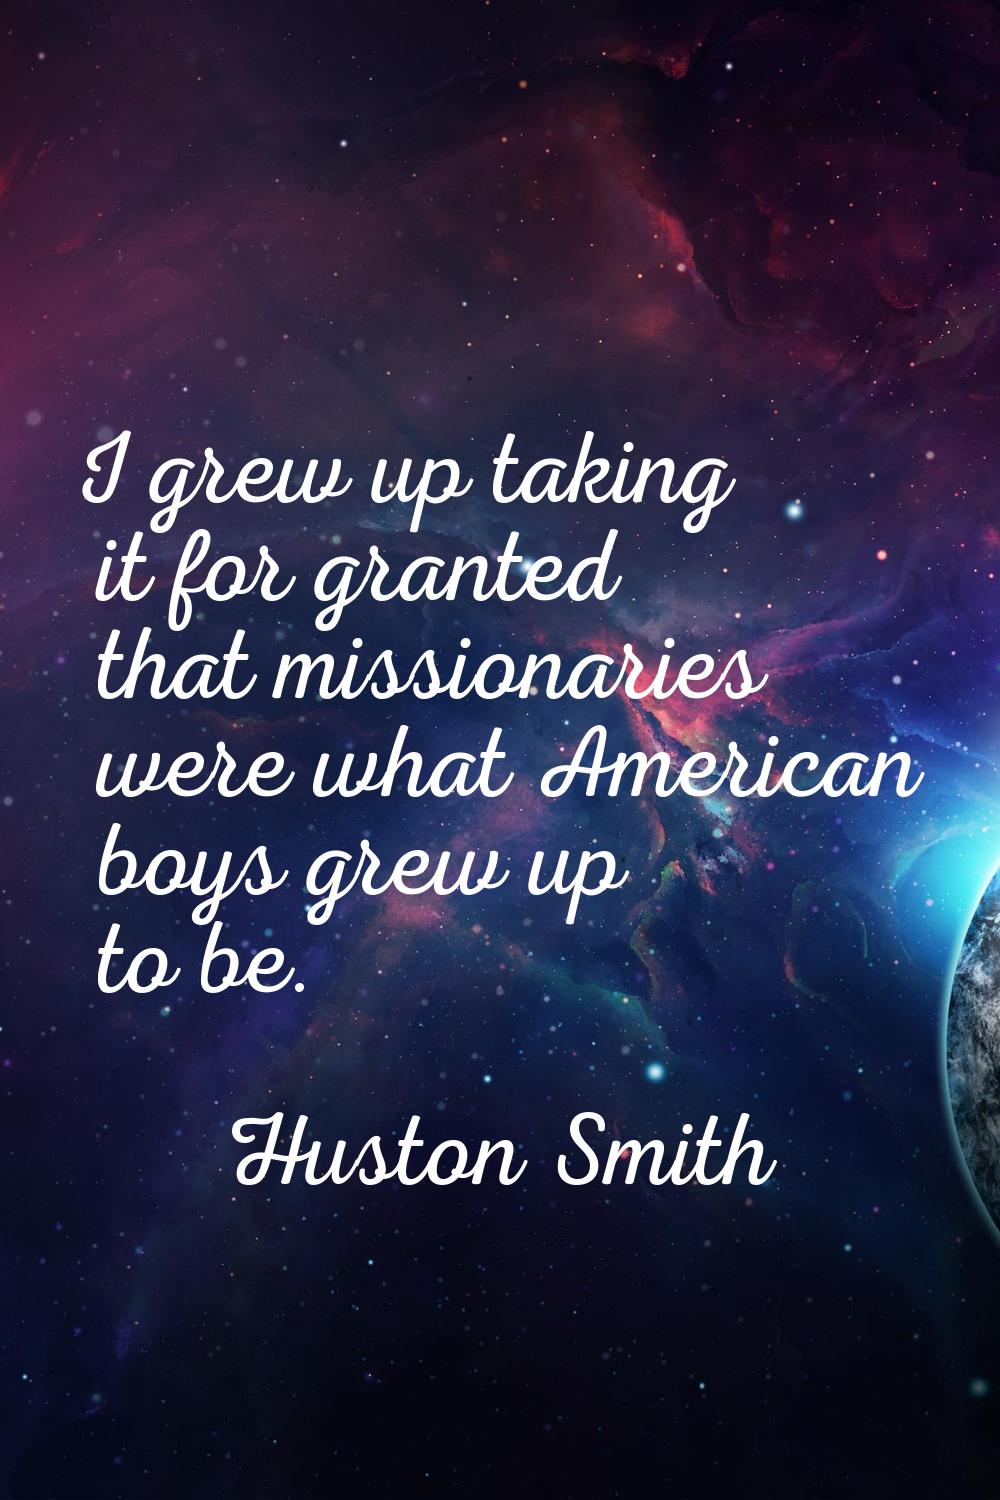 I grew up taking it for granted that missionaries were what American boys grew up to be.